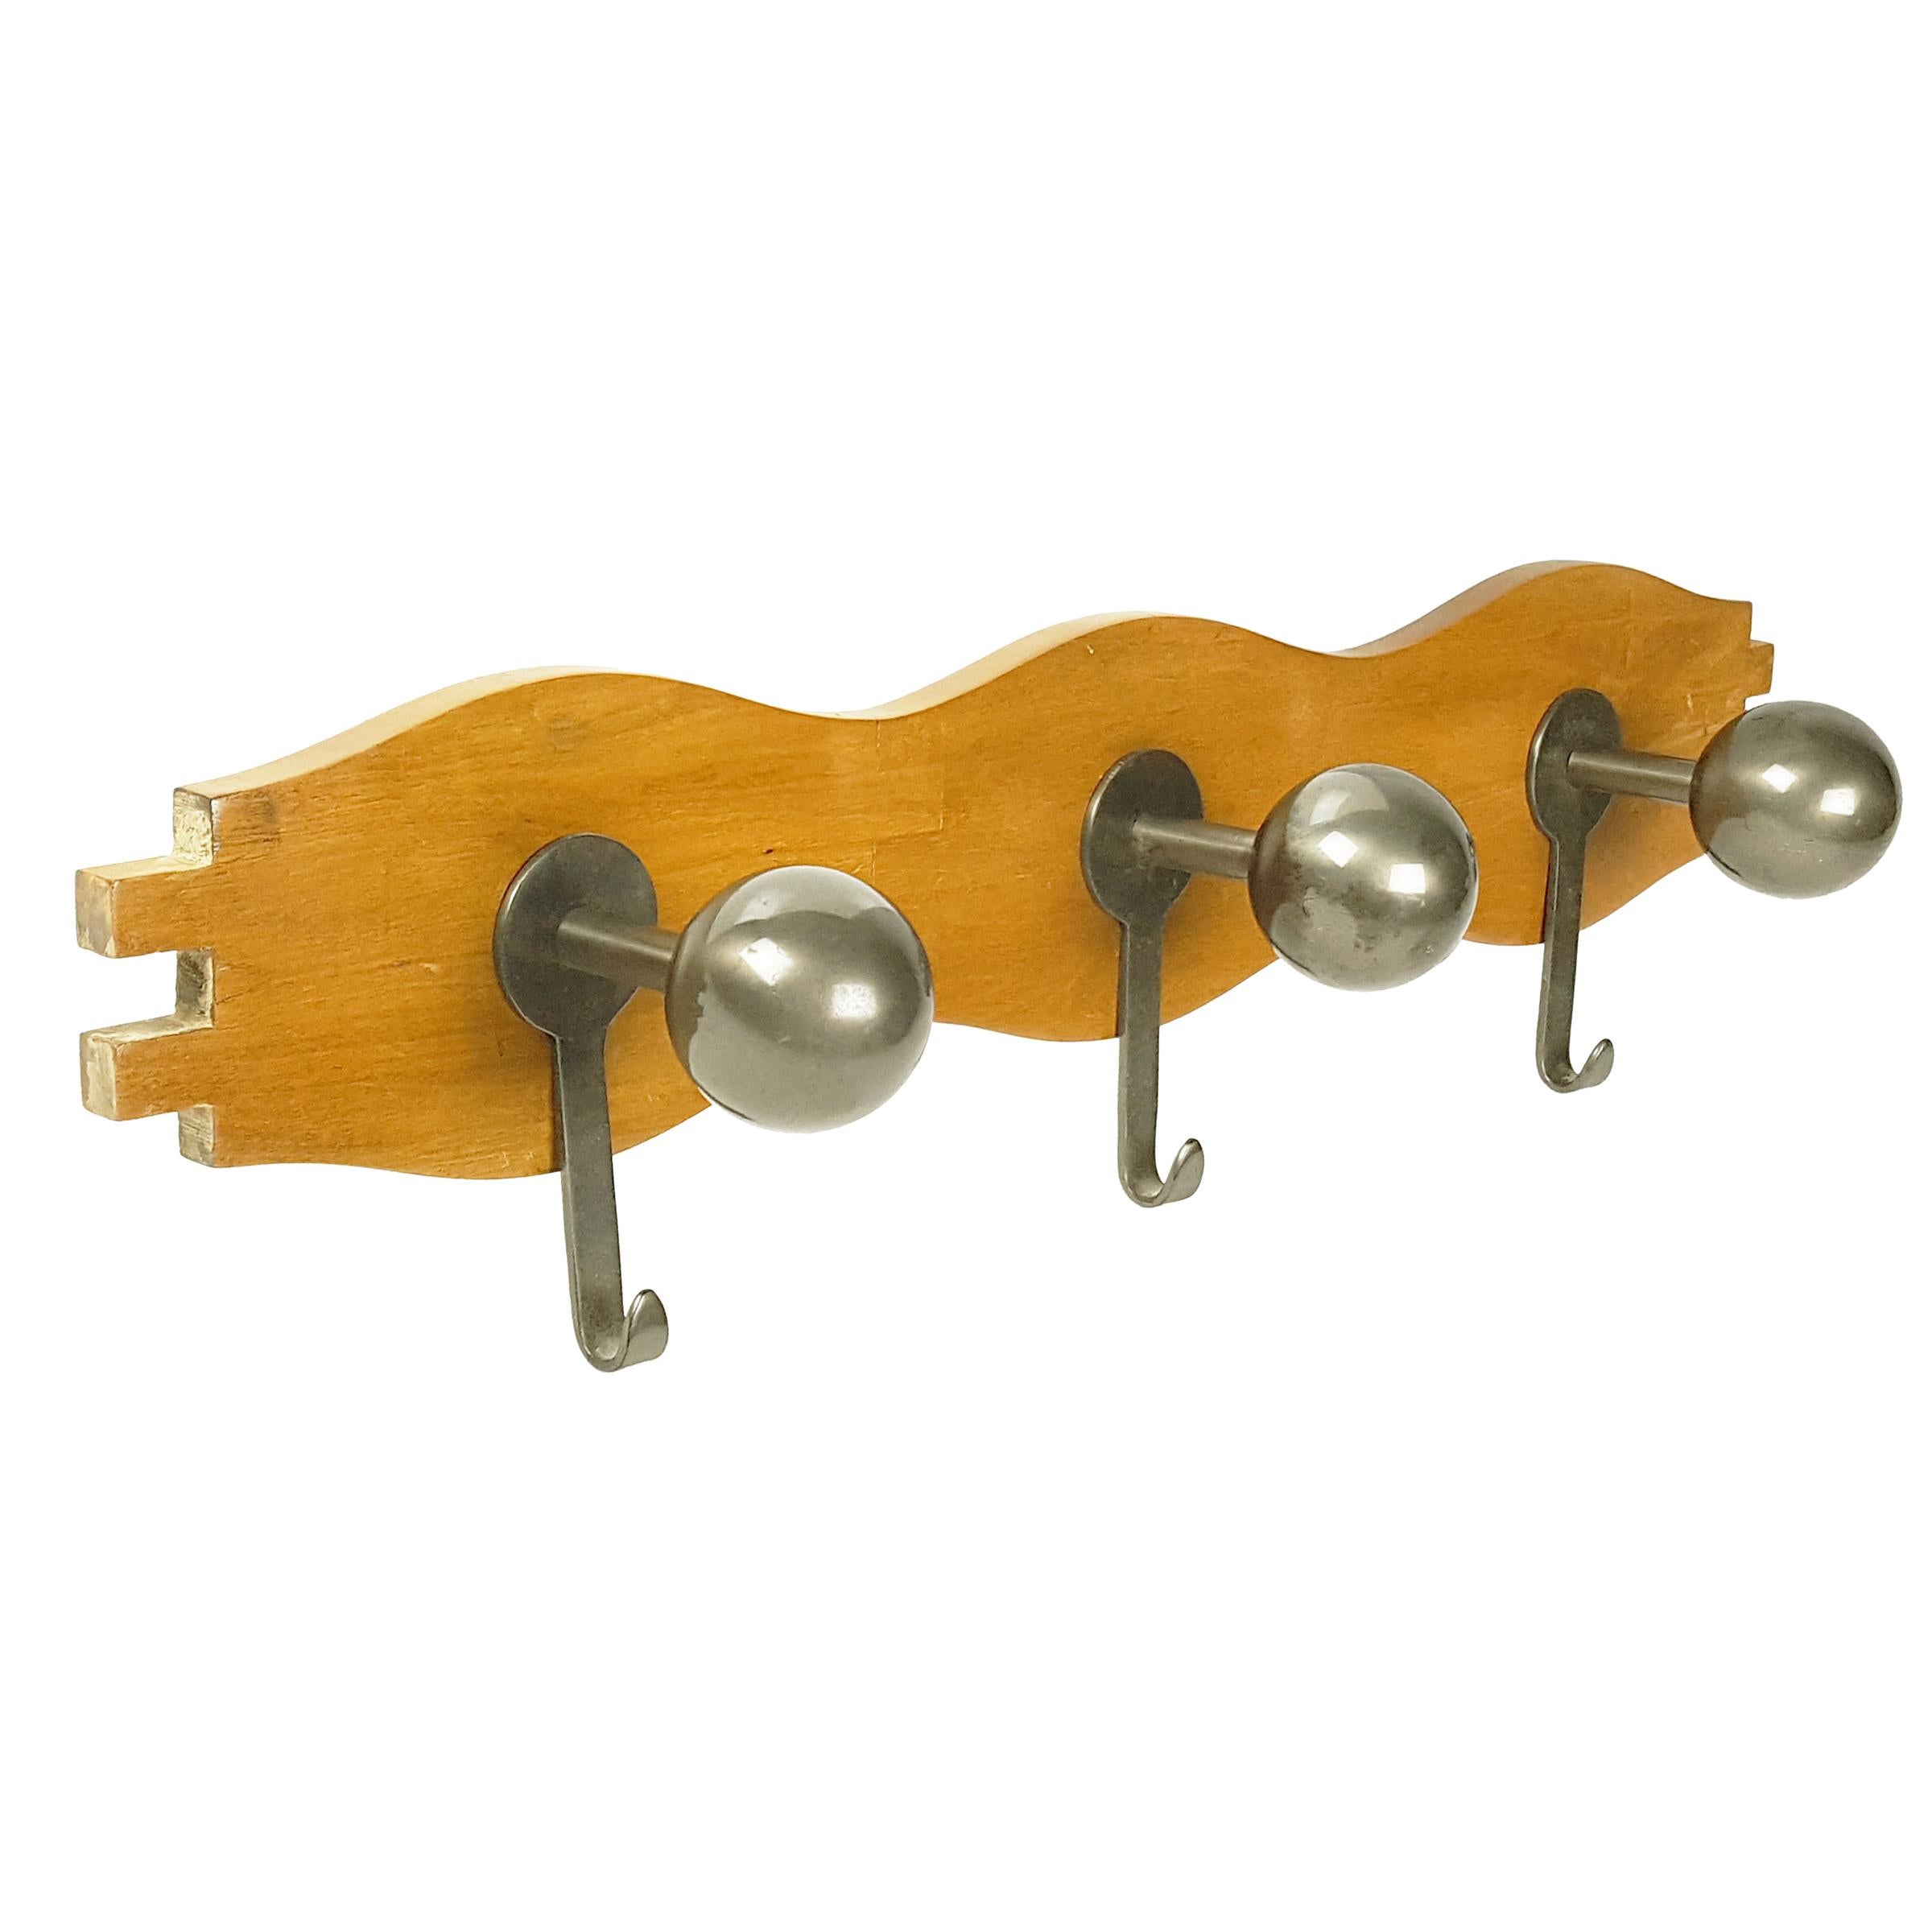 Walnut and Burnished Brass Wall Coat Rack "Attaccapanni" by Mazza for Artemide For Sale